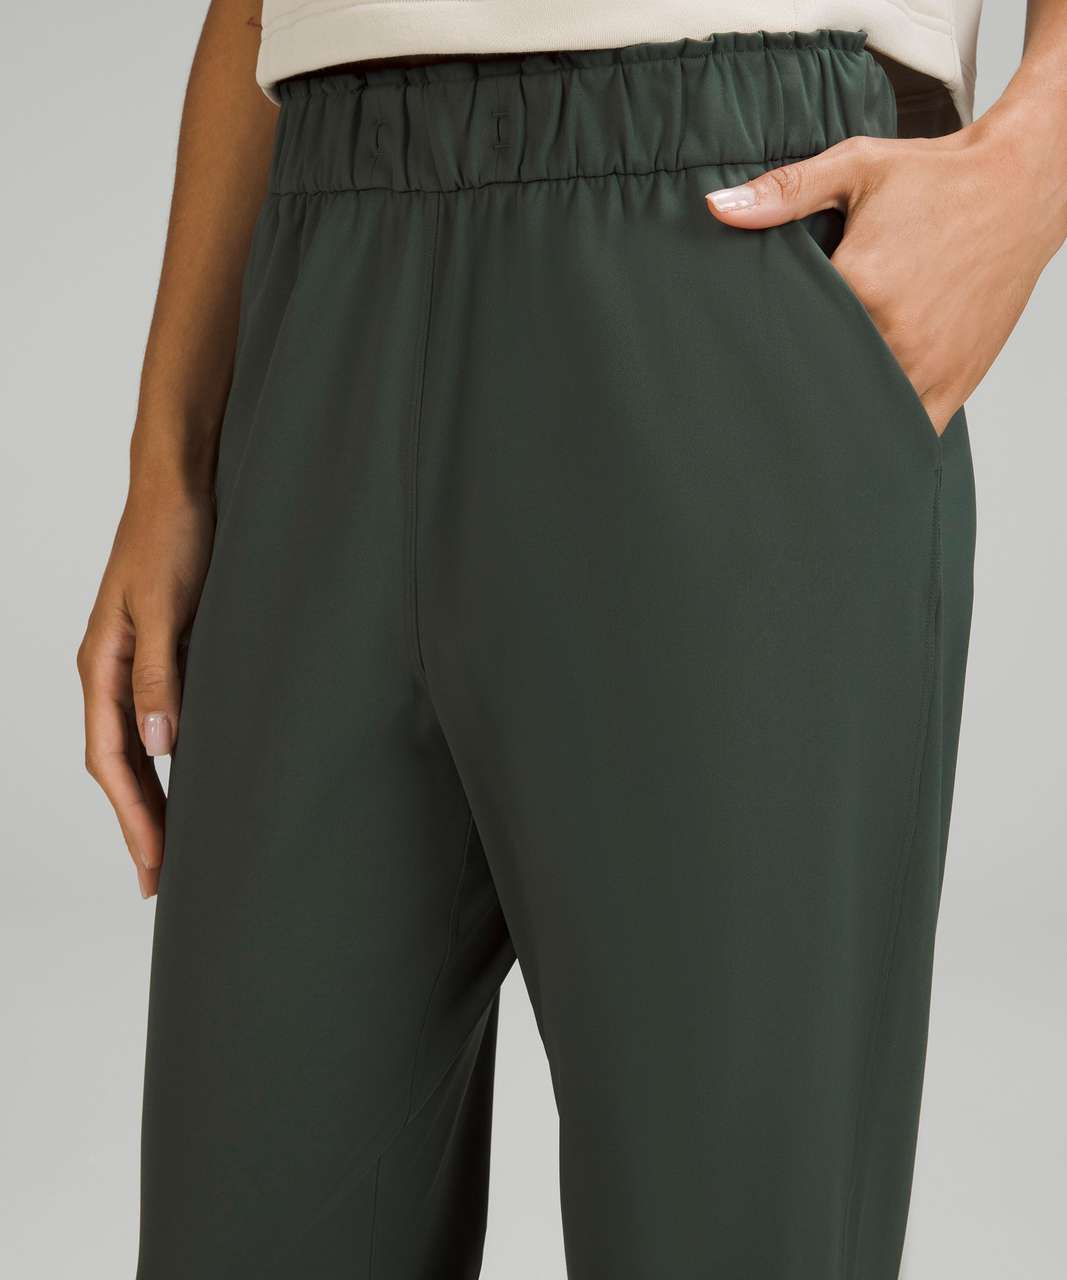 NWT Lululemon Groove Pant Super HR Flared Size 4 Smoked Spruce Army Green  NEW